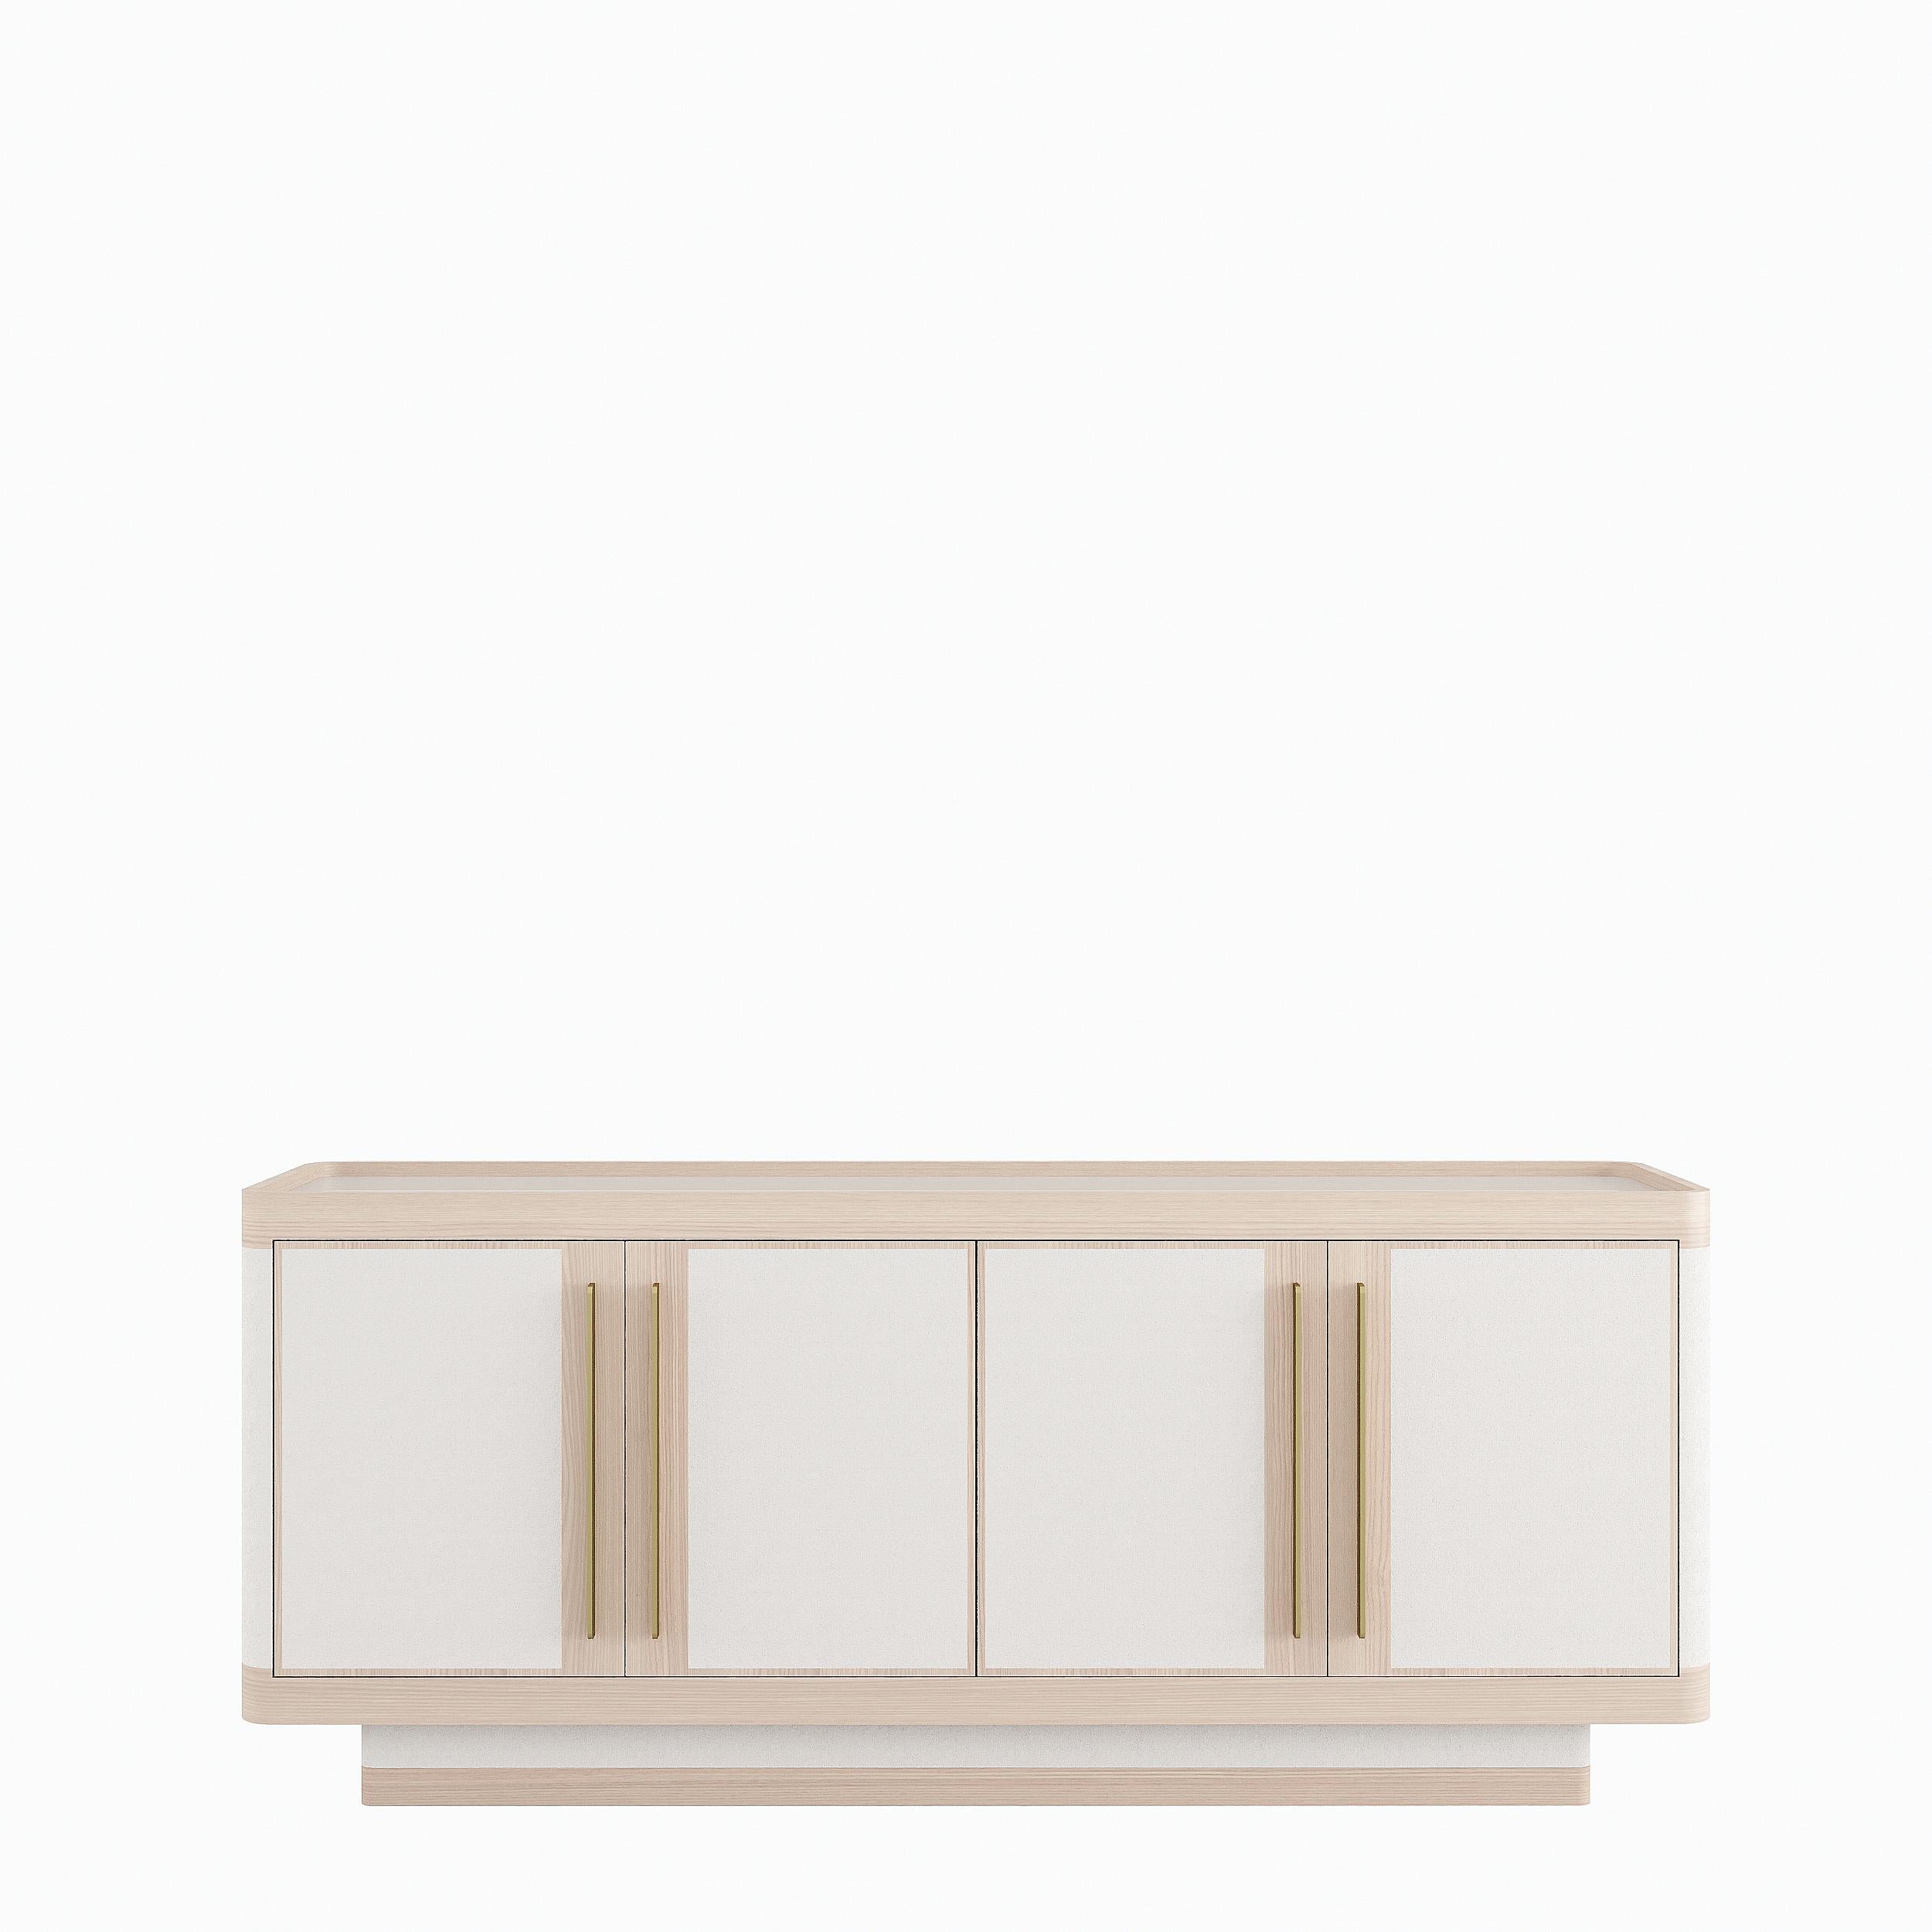 Contemporary GUGA sideboard with lined doors and Antique Brass handles